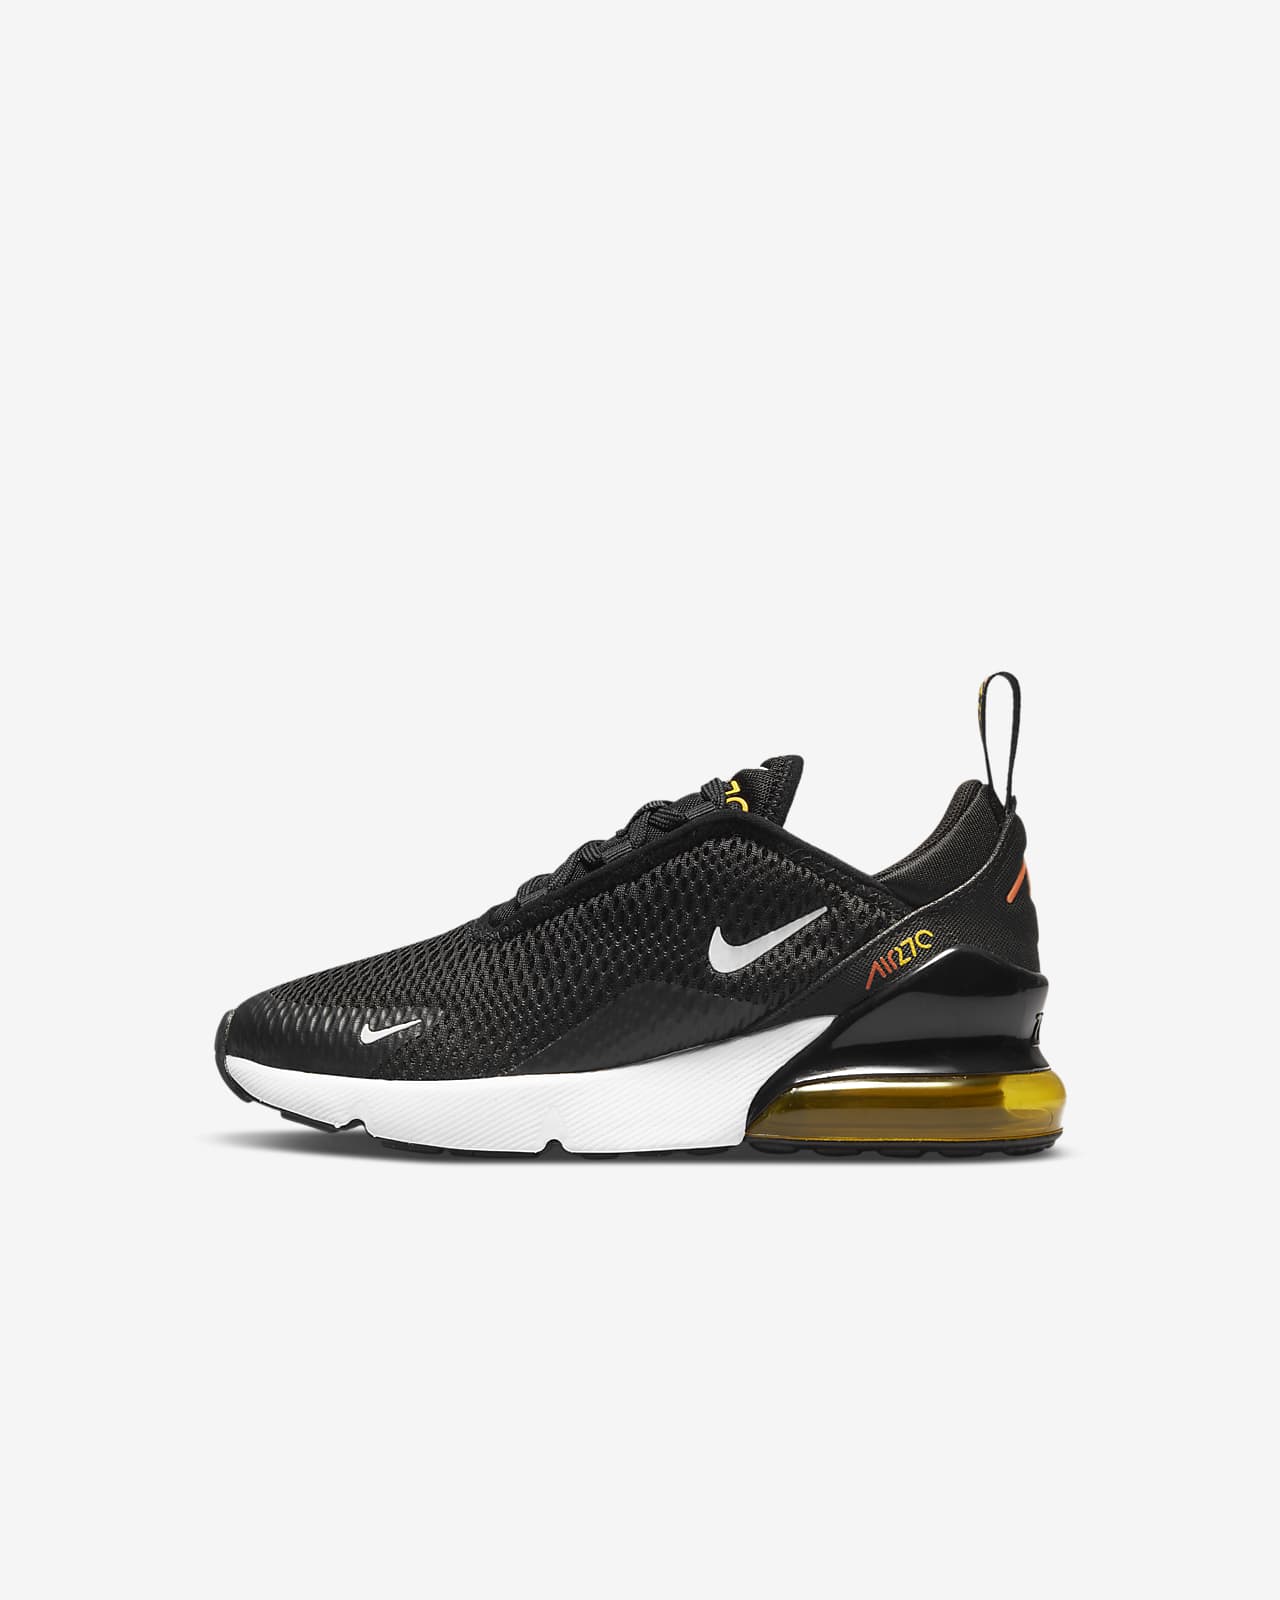 Nike Air Max 270 Younger Kids' Shoes